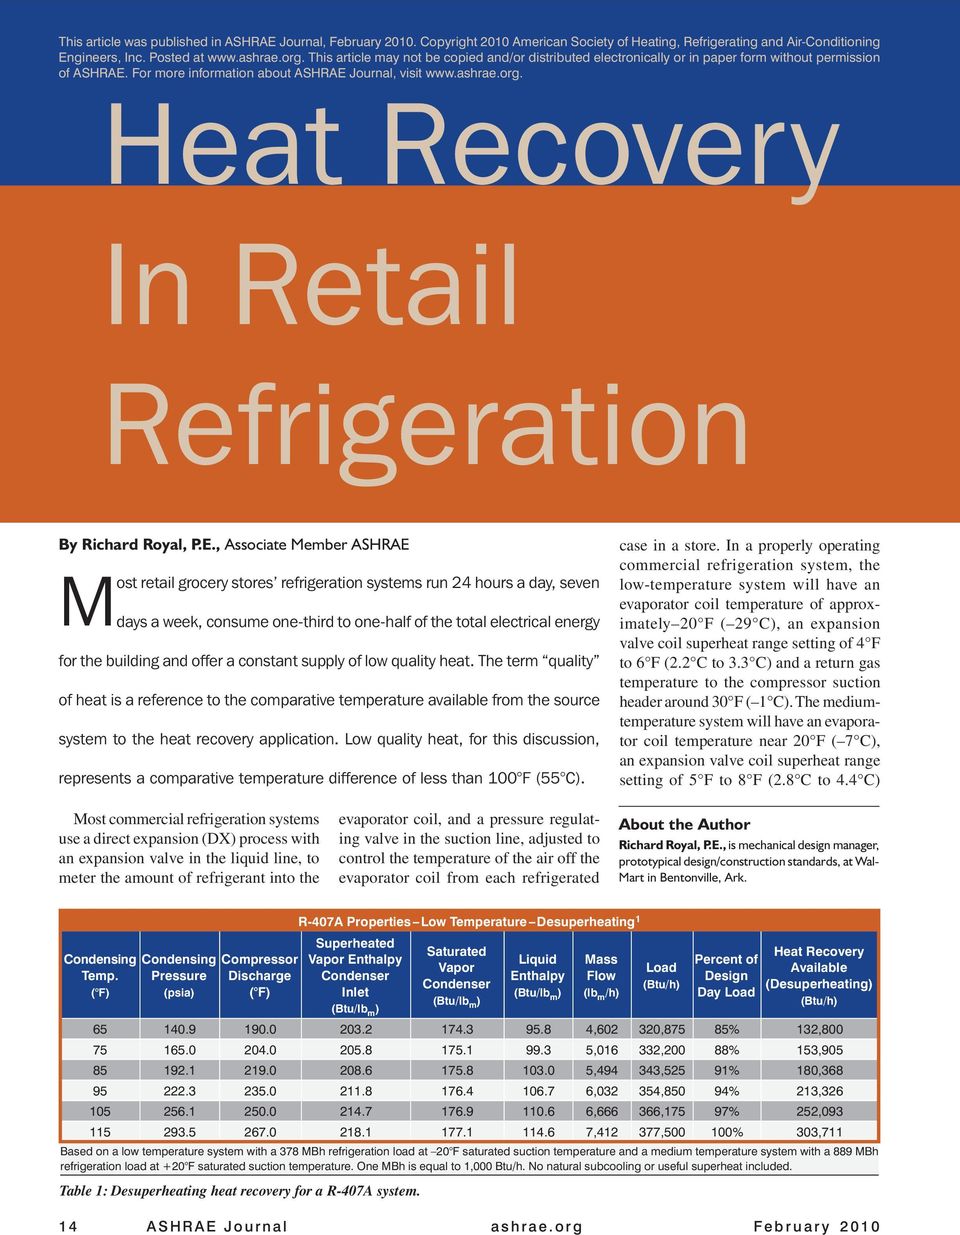 In Retail Refrigeration By Richard Royal, P.E.